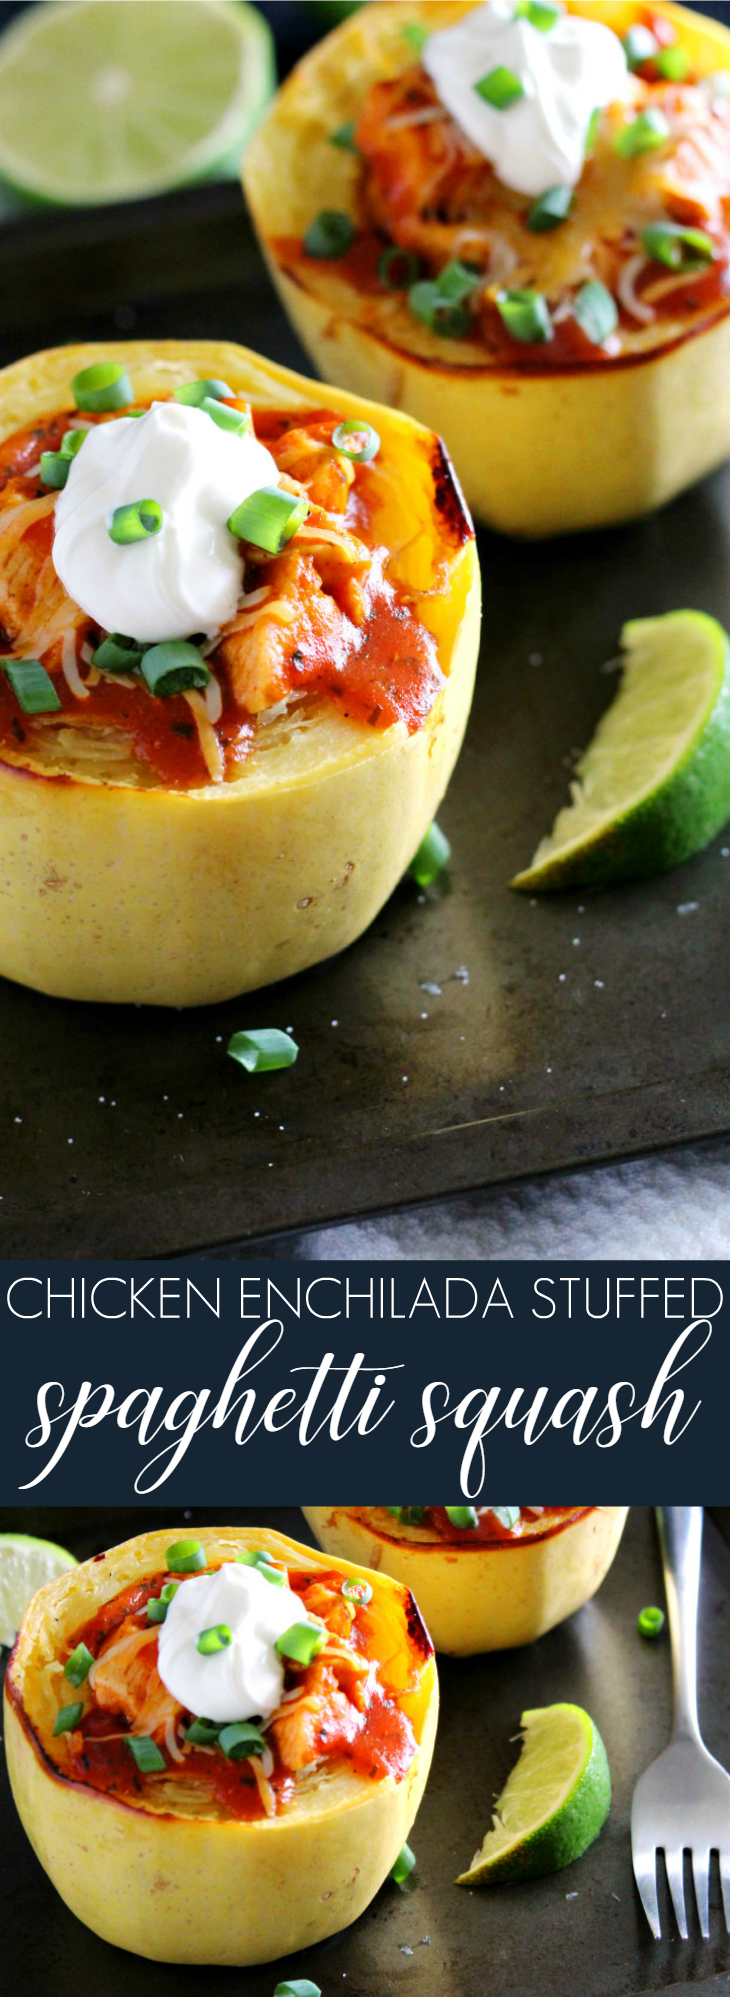 Looking for a low-carb meal that's completely satisfying? This Chicken Enchilada Spaghetti Squash is the answer! Cook the squash ahead during your weekly meal prep then make this cheap healthy meal for a busy weeknight dinner.